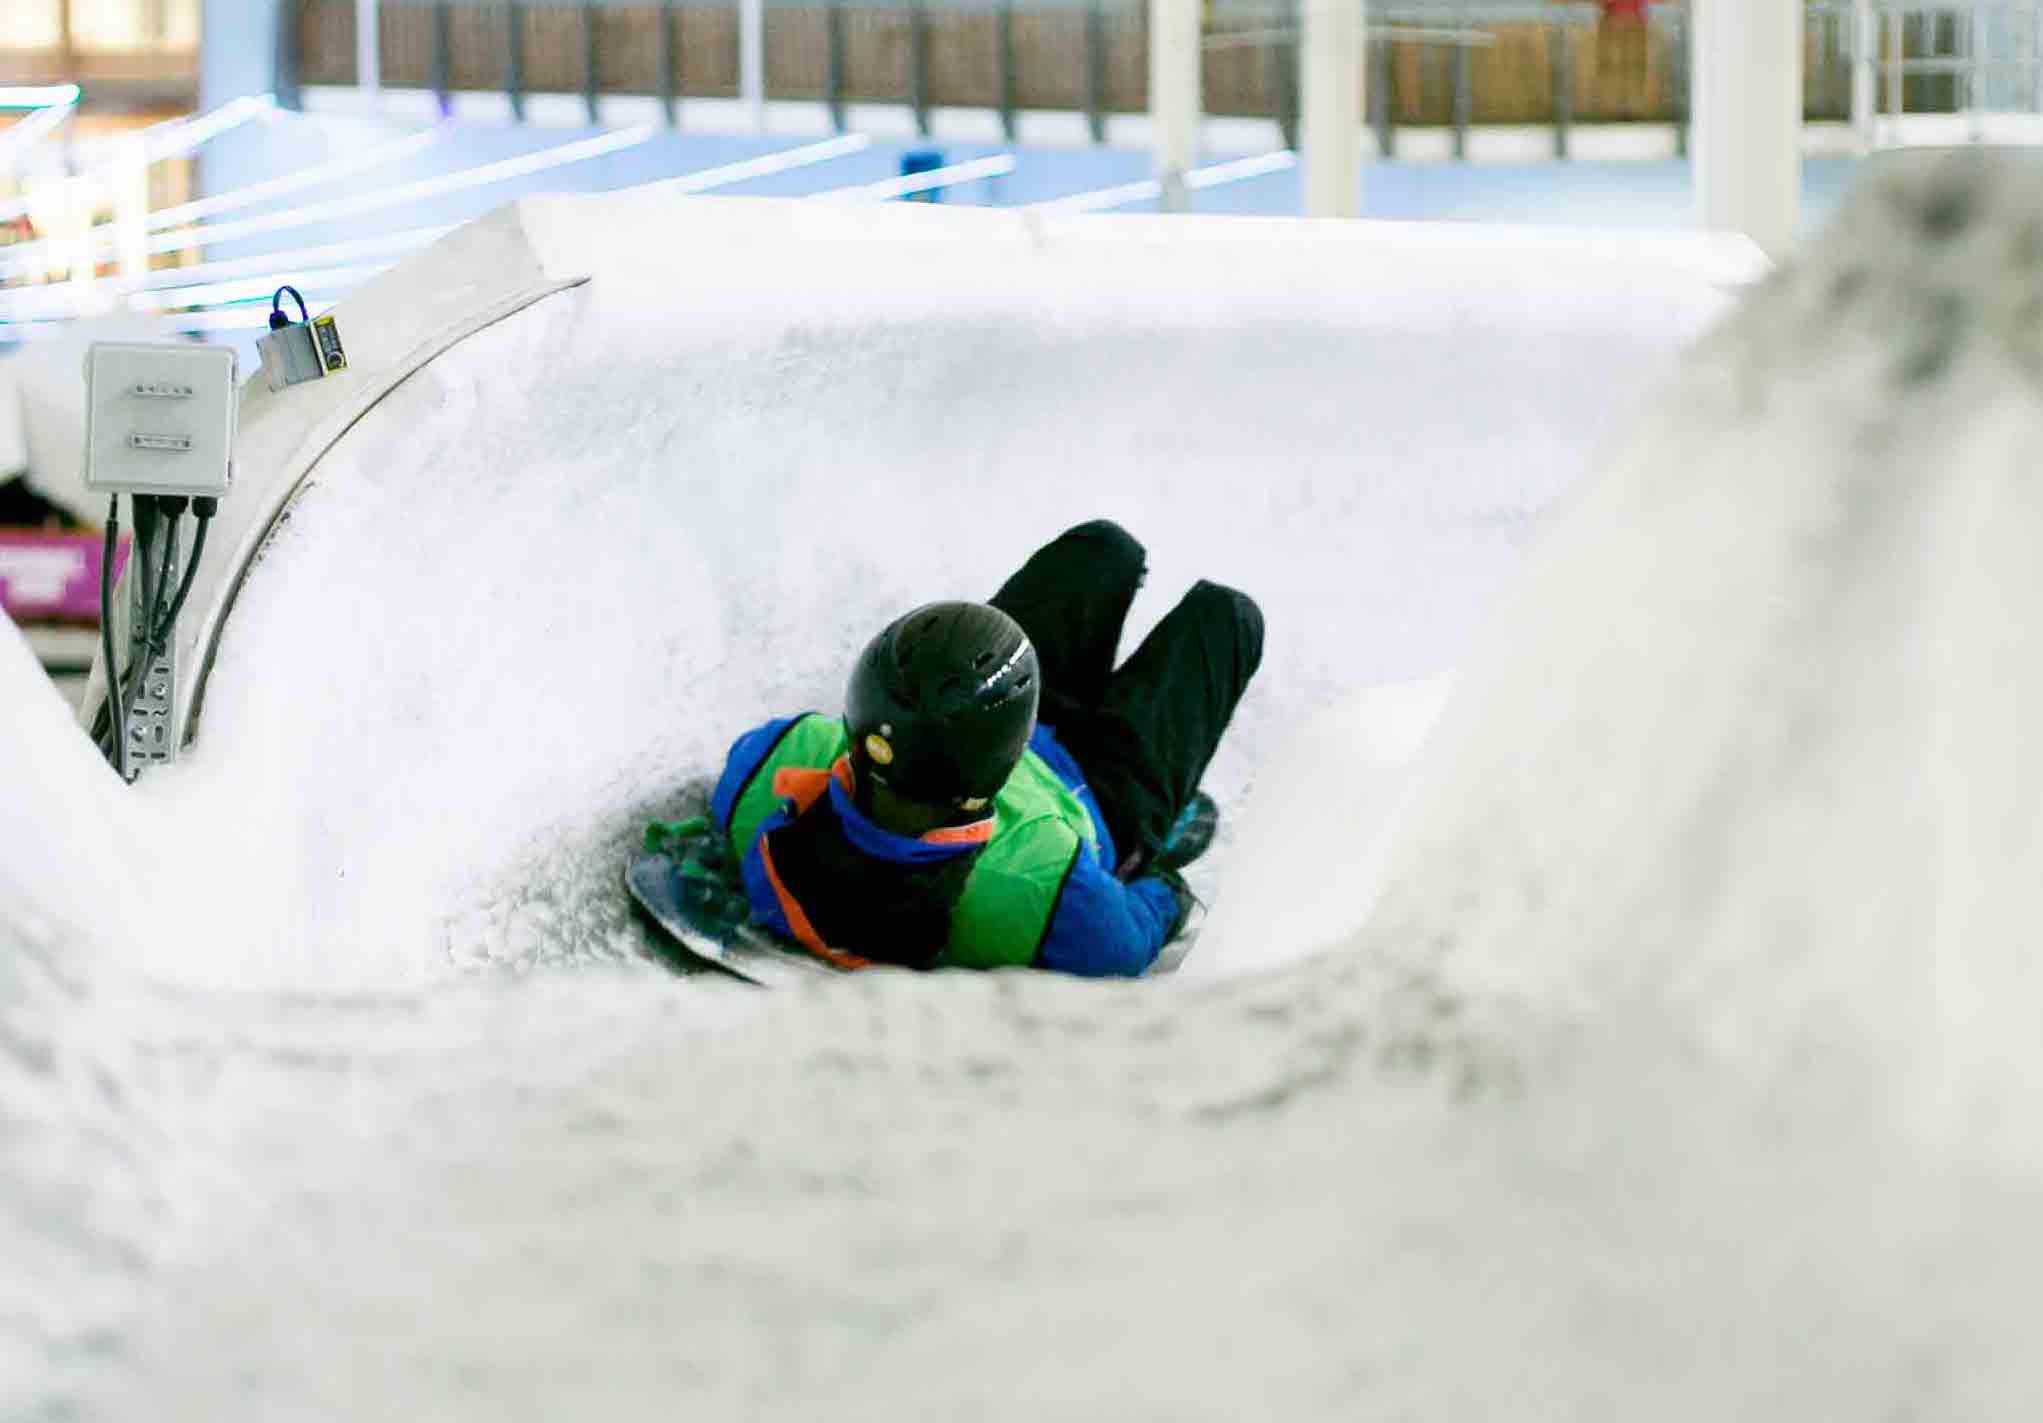 a person going down the ice slide in their blue and green jacket and black helmet